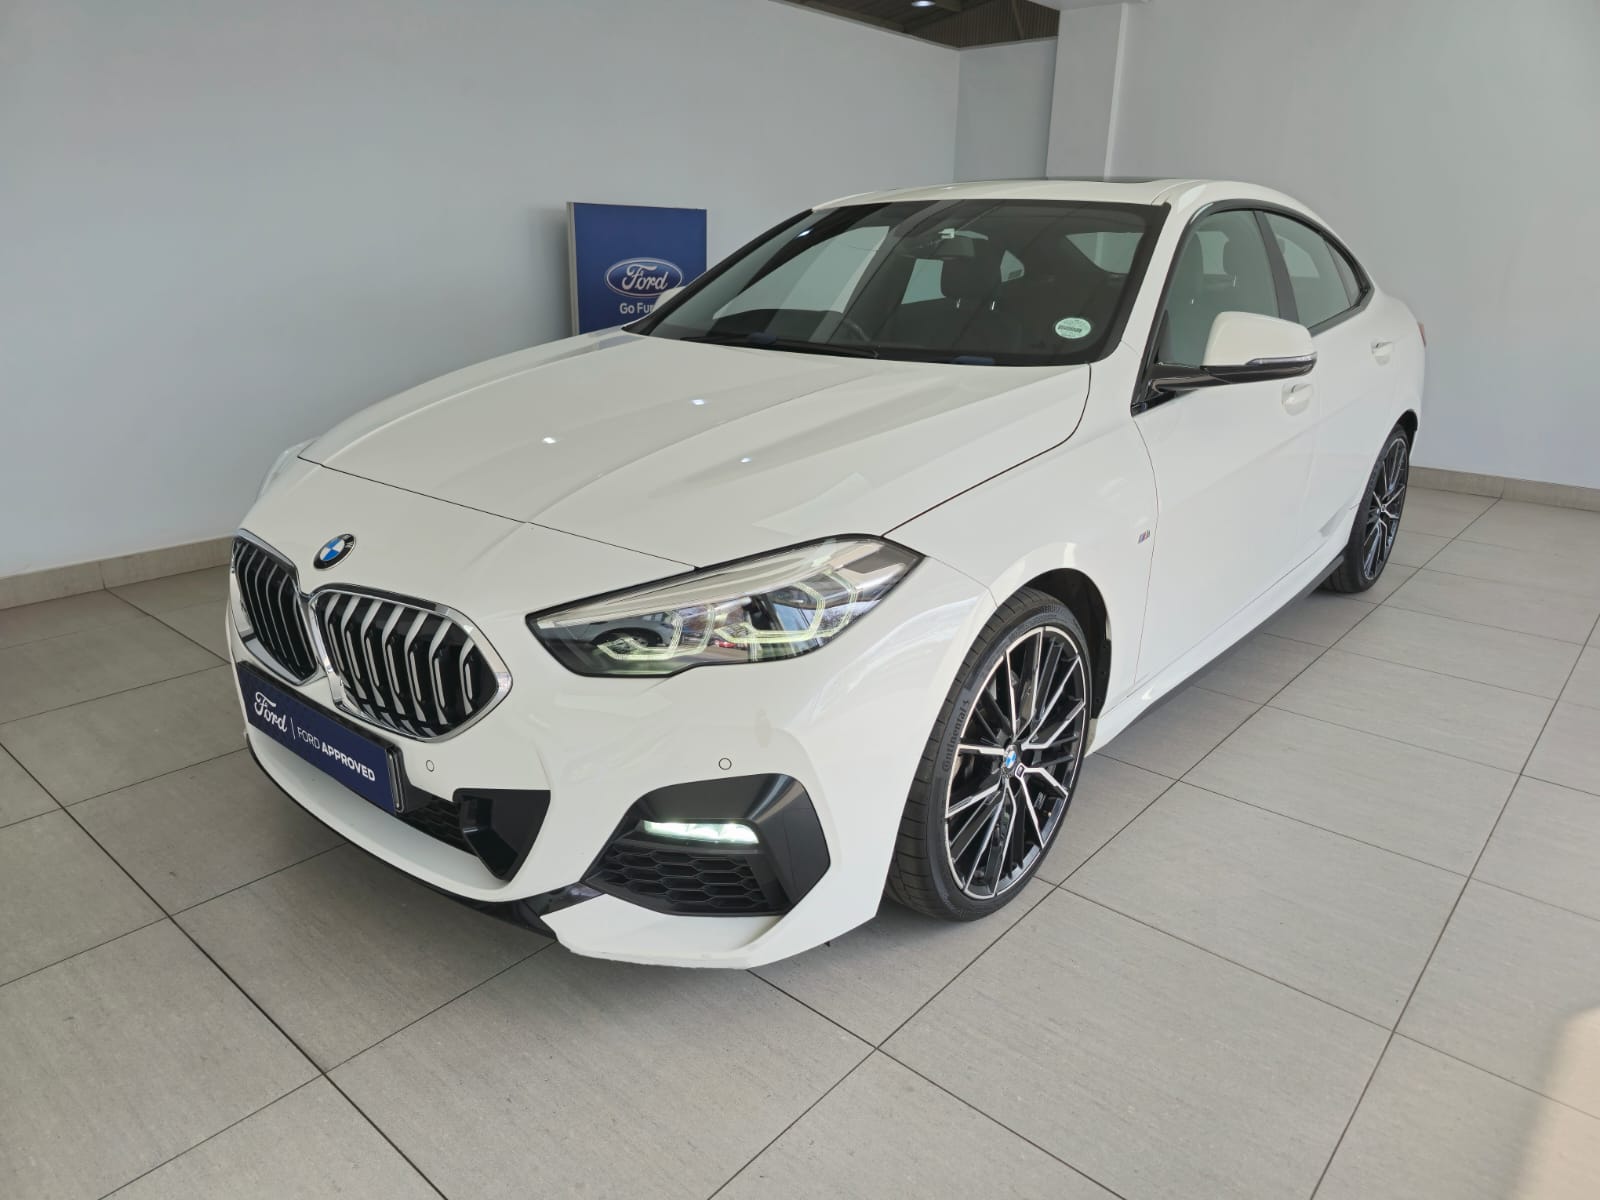 2021 BMW 2 Series Coupe  for sale - UF70932